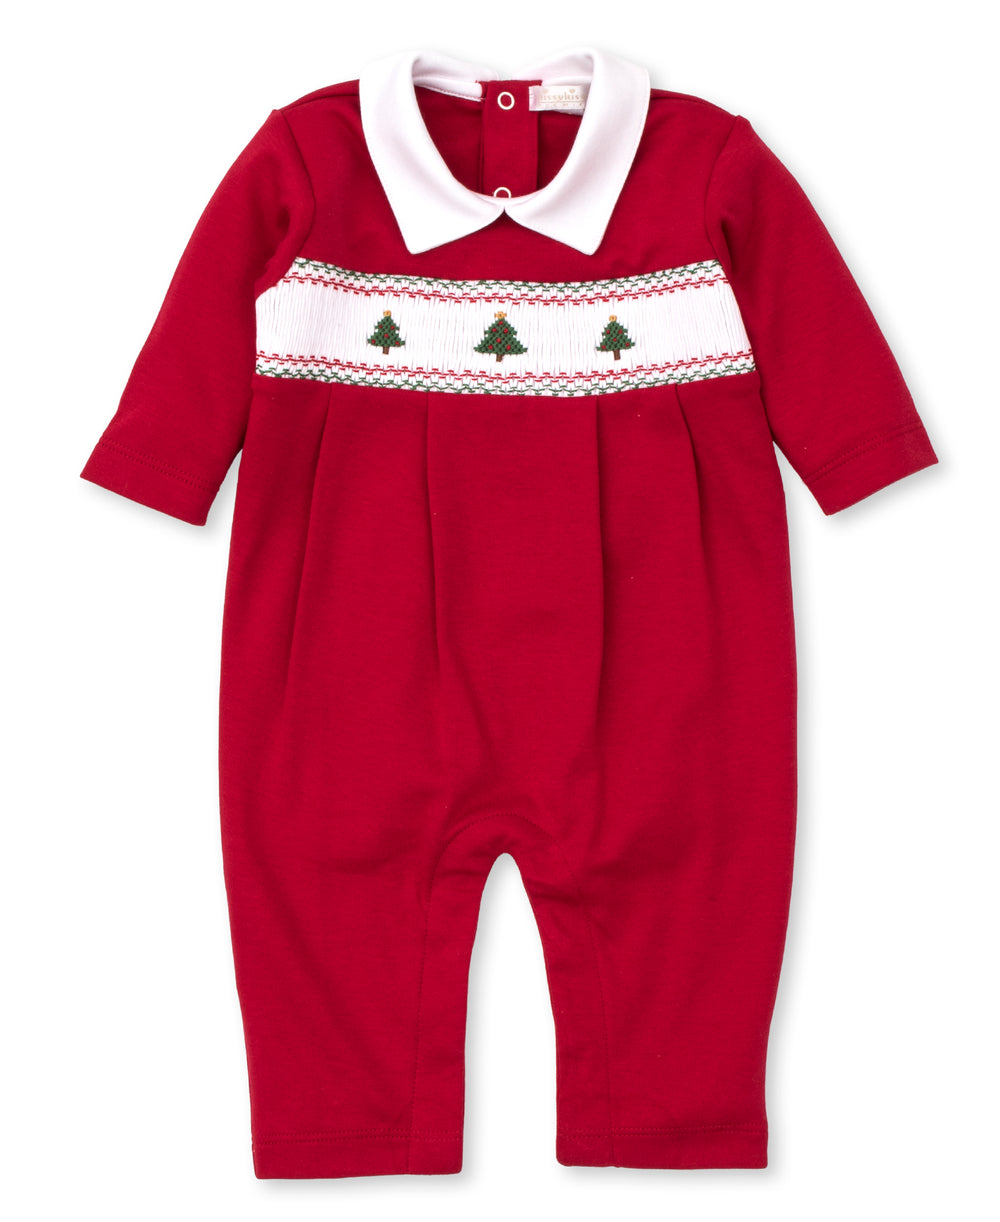 Red CLB Holiday Medley 21 Footie with Hand Smocking